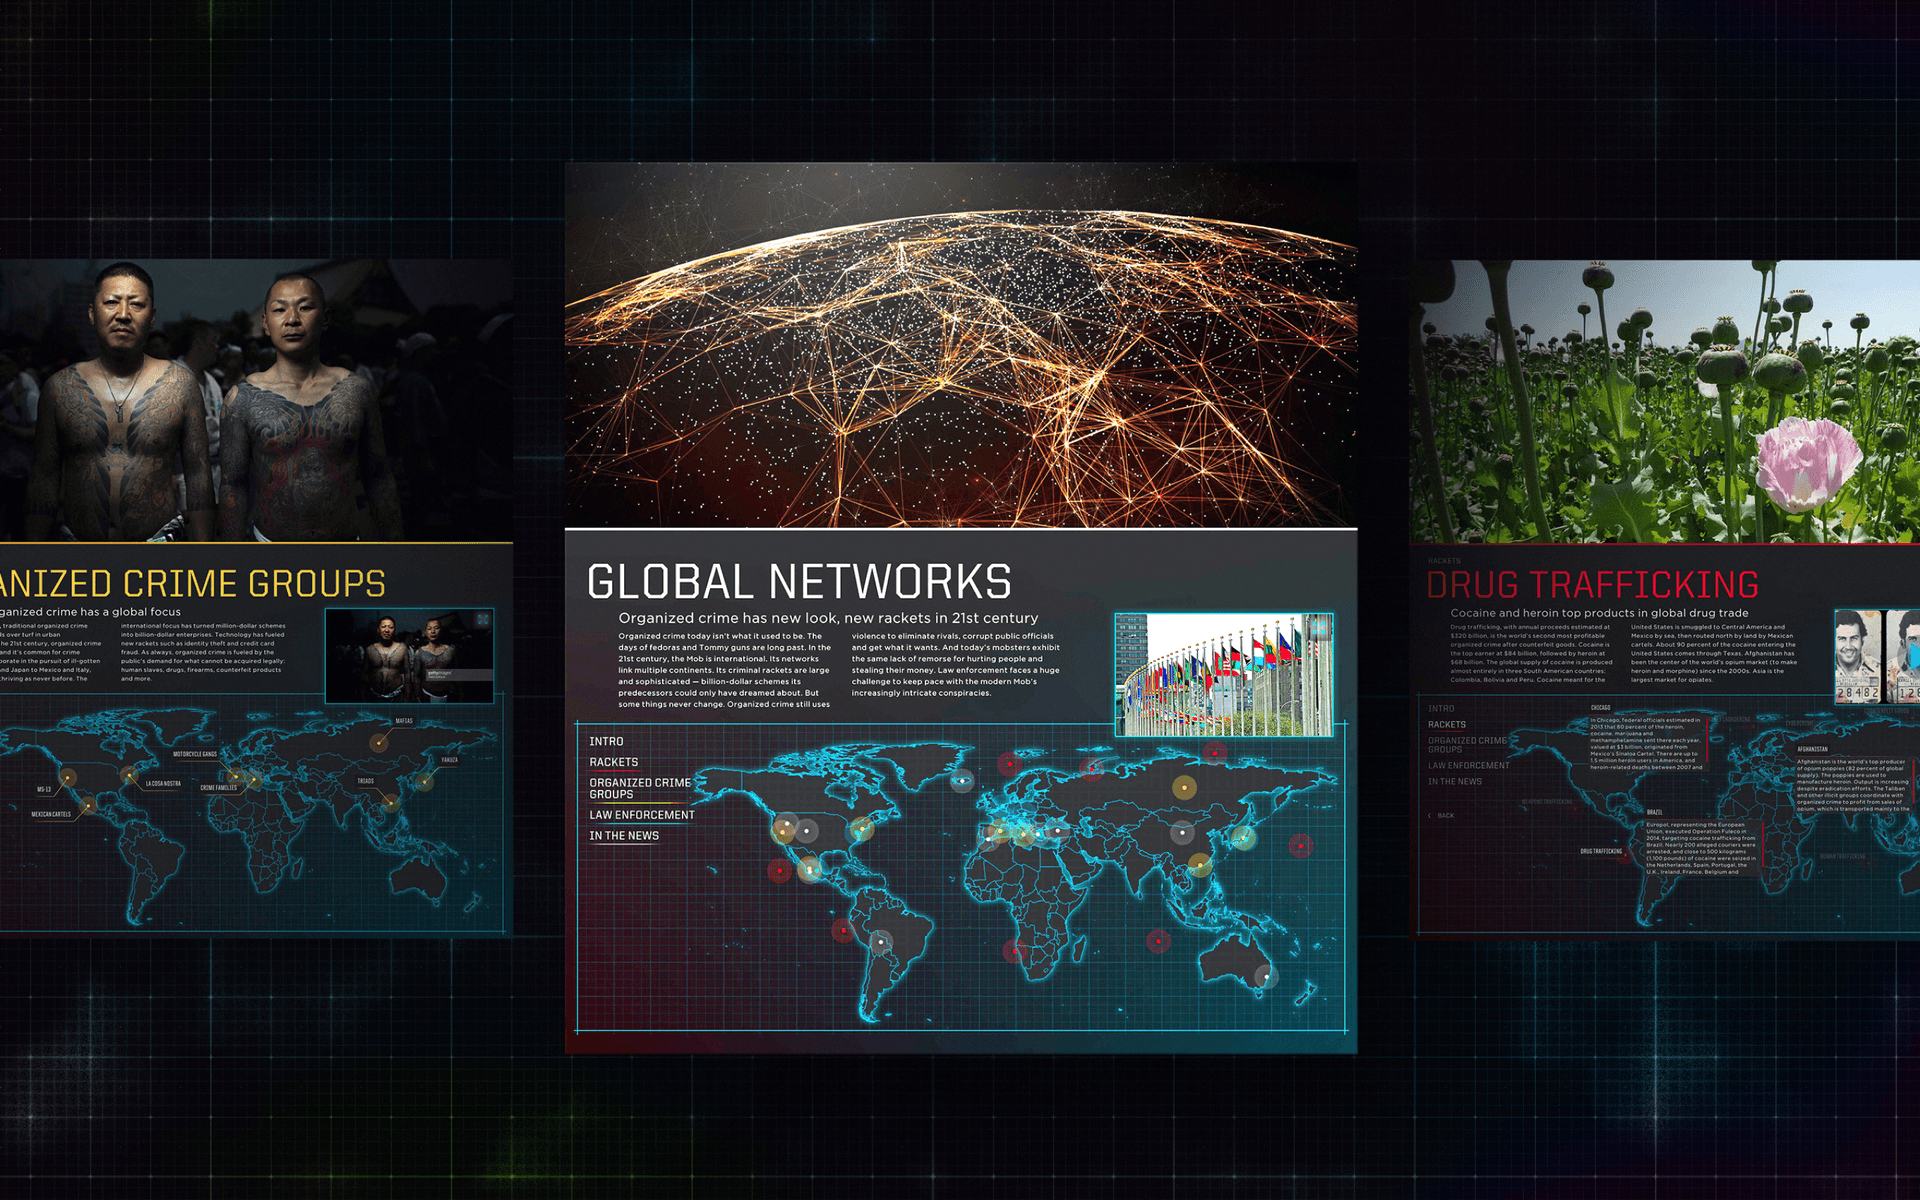 A row of 3 images displaying content used in the Mob Museum video wall. Each screen layout has a large graphic occupying the upper third, with informative text and a related world map below. The screens are labeled Organized Crime Groups, Global Networks, and Drug Trafficking.